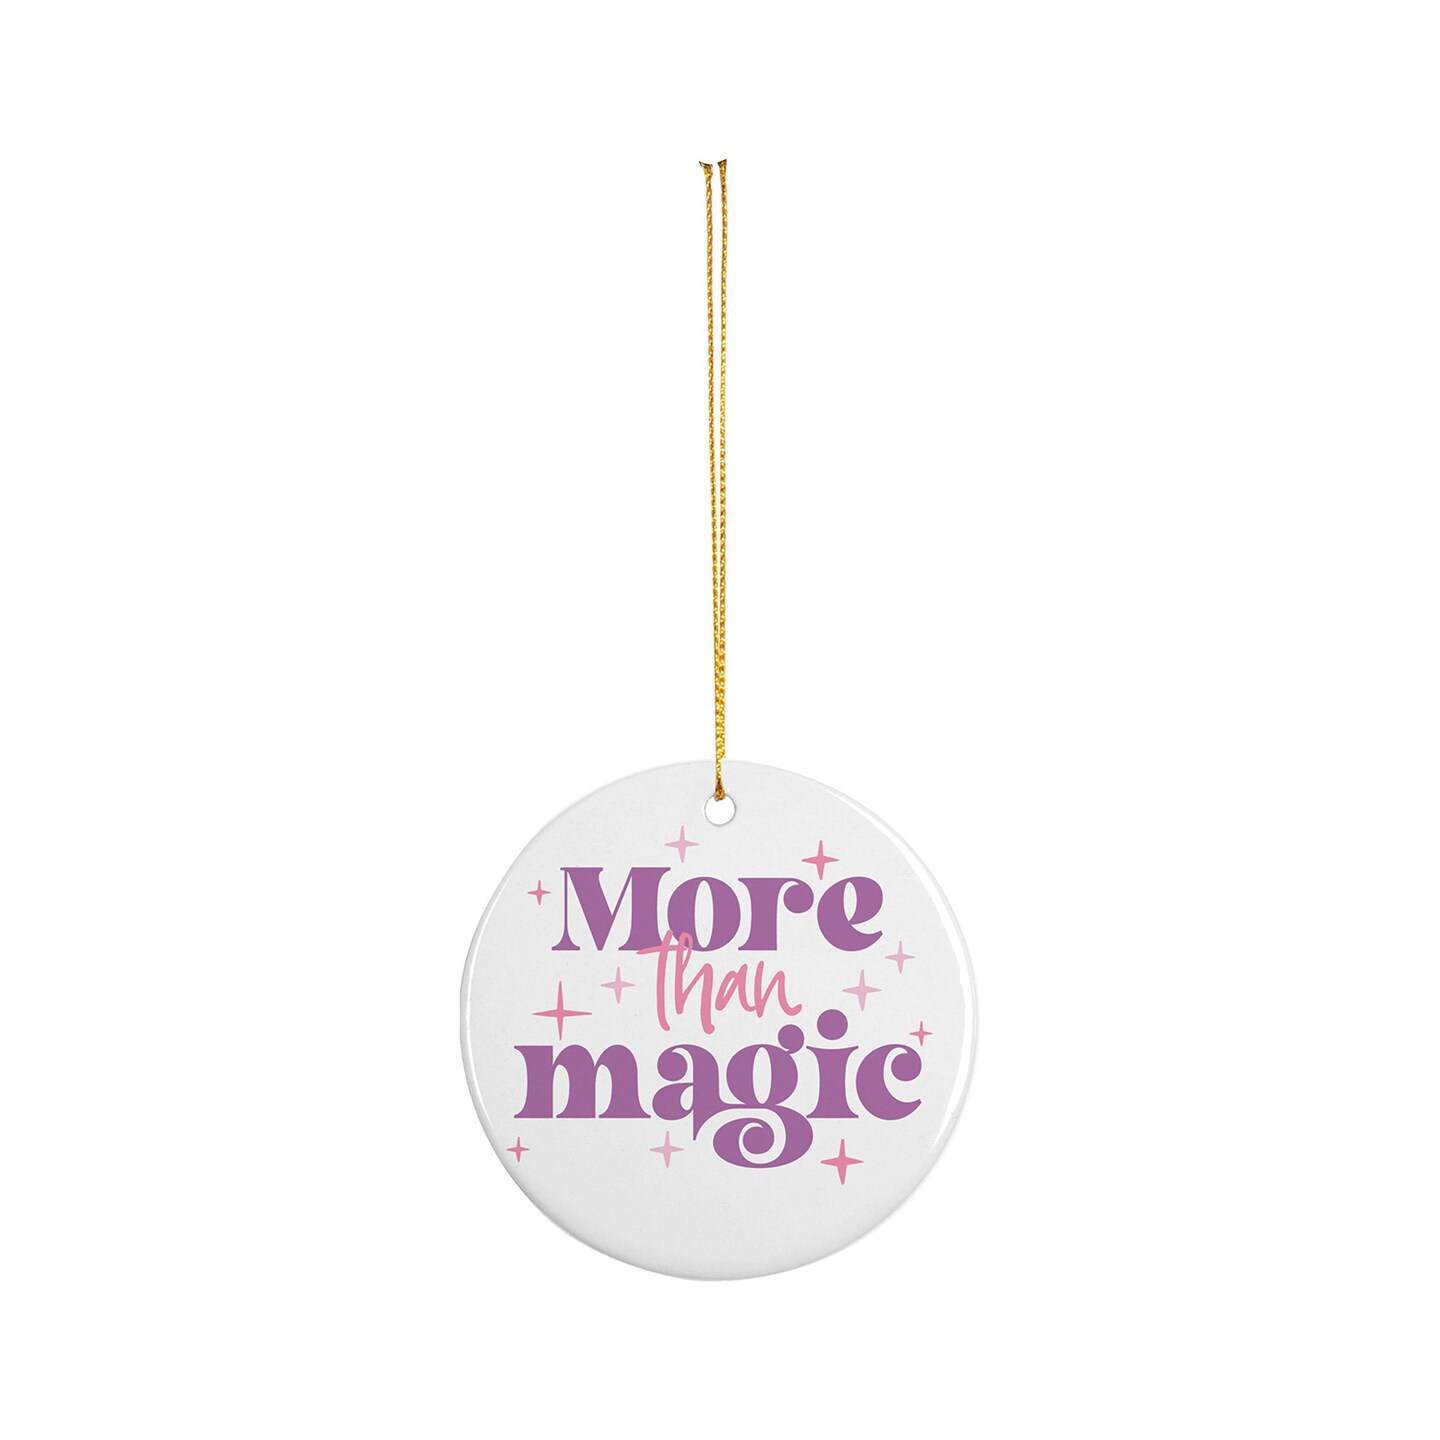 Have you seen the new sublimation ready ornaments at @Michaels